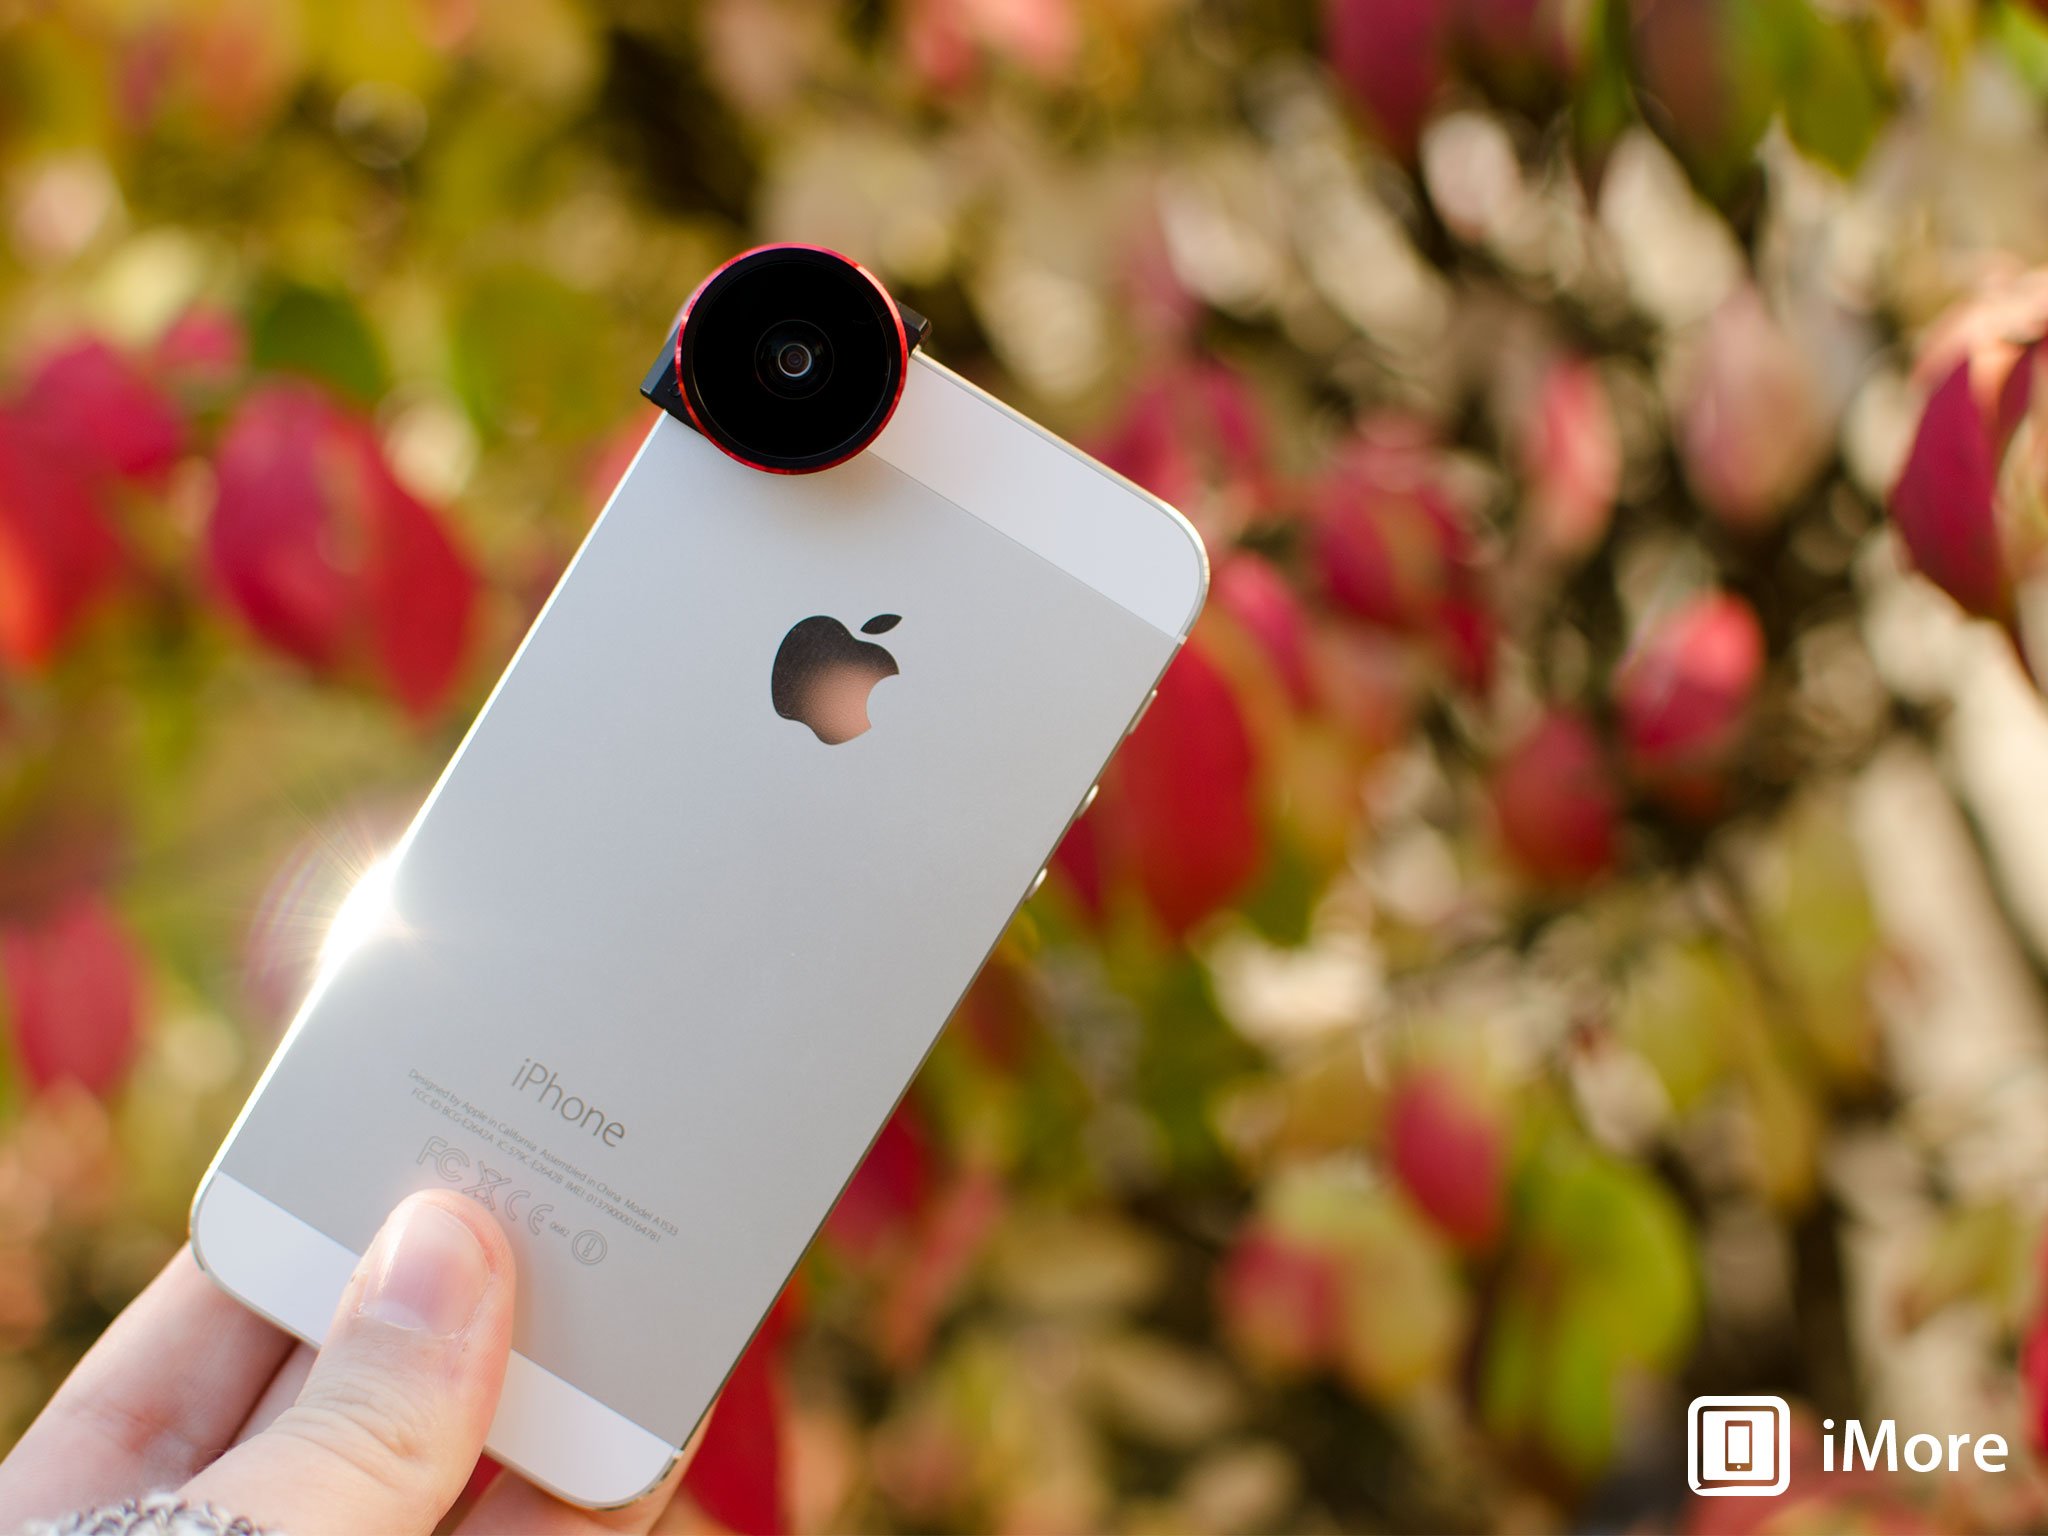 Olloclip 4-in-1 for iPhone 5 and iPhone 5s review, and sample photos!